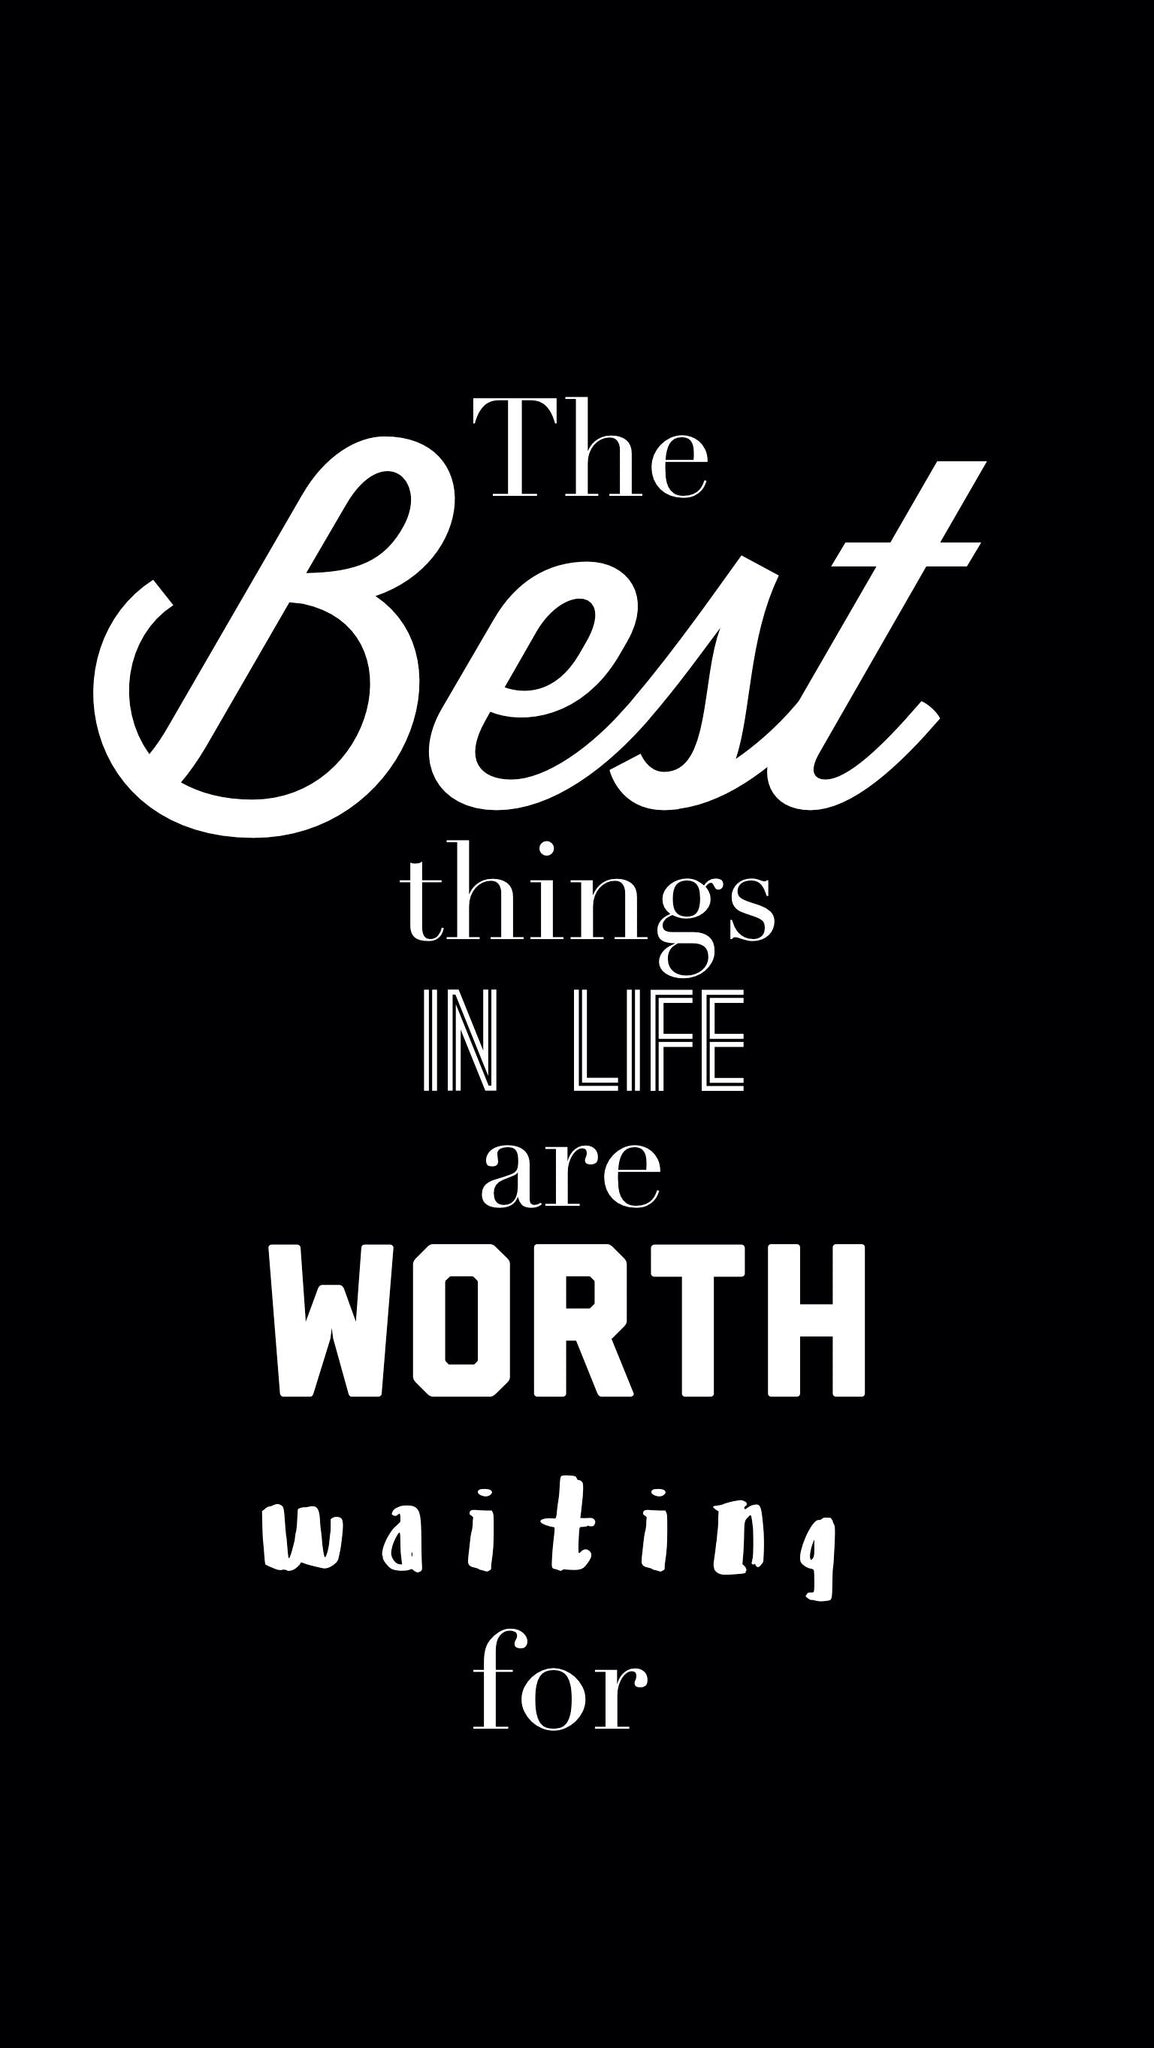 BEST THINGS IN LIFE ARE WORTH WAITING FOR!